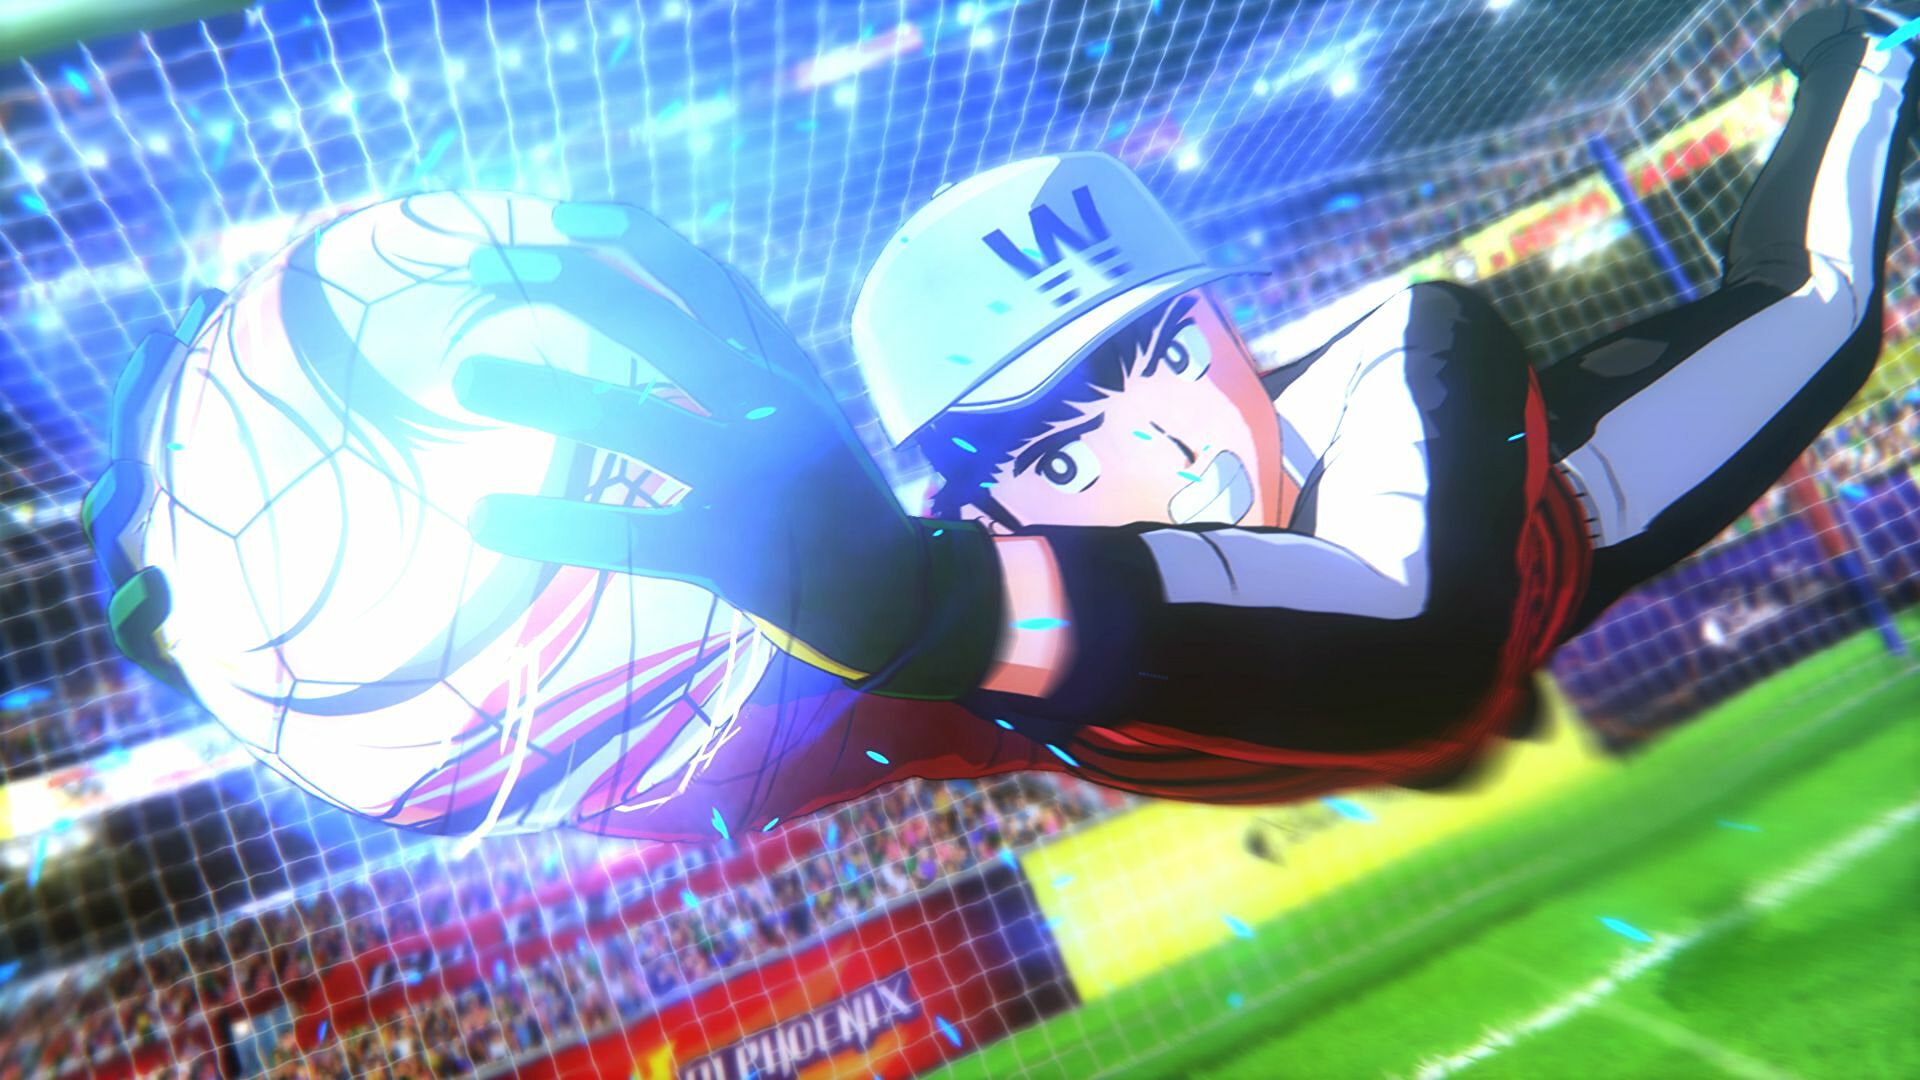 Captain Tsubasa: Rise of New Champions is the return of weird football games